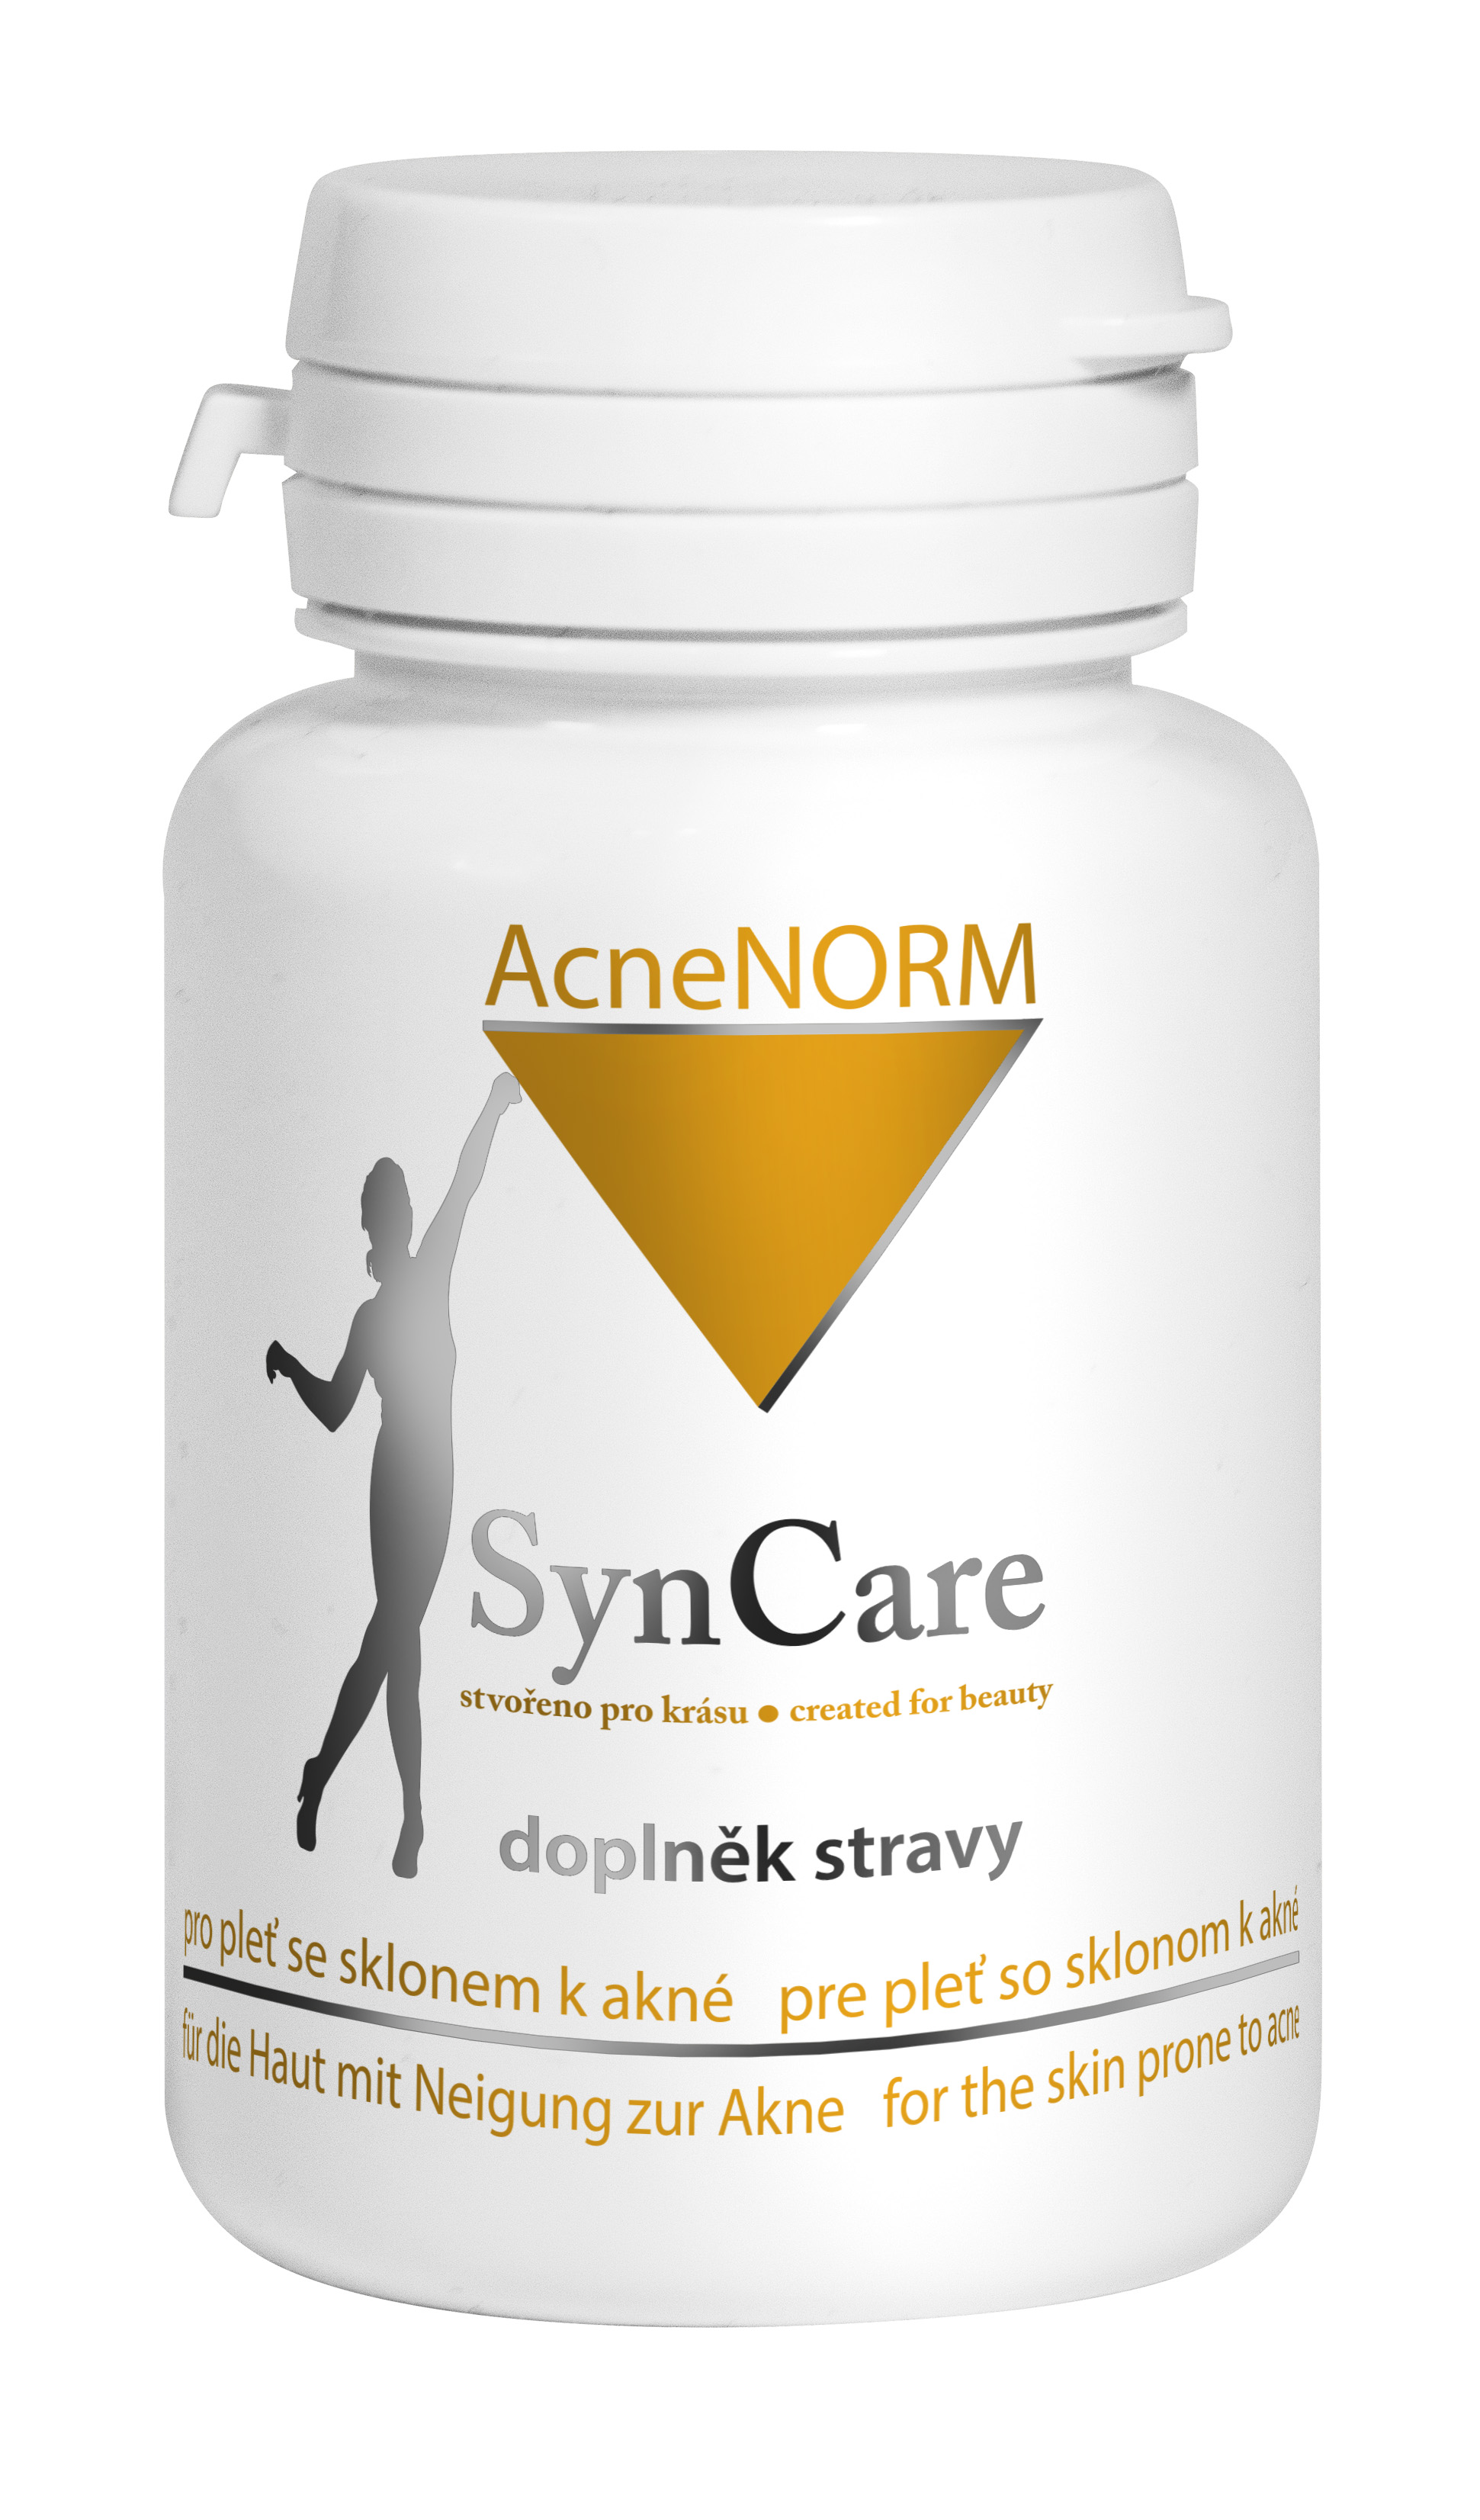 SynCare AcneNORM